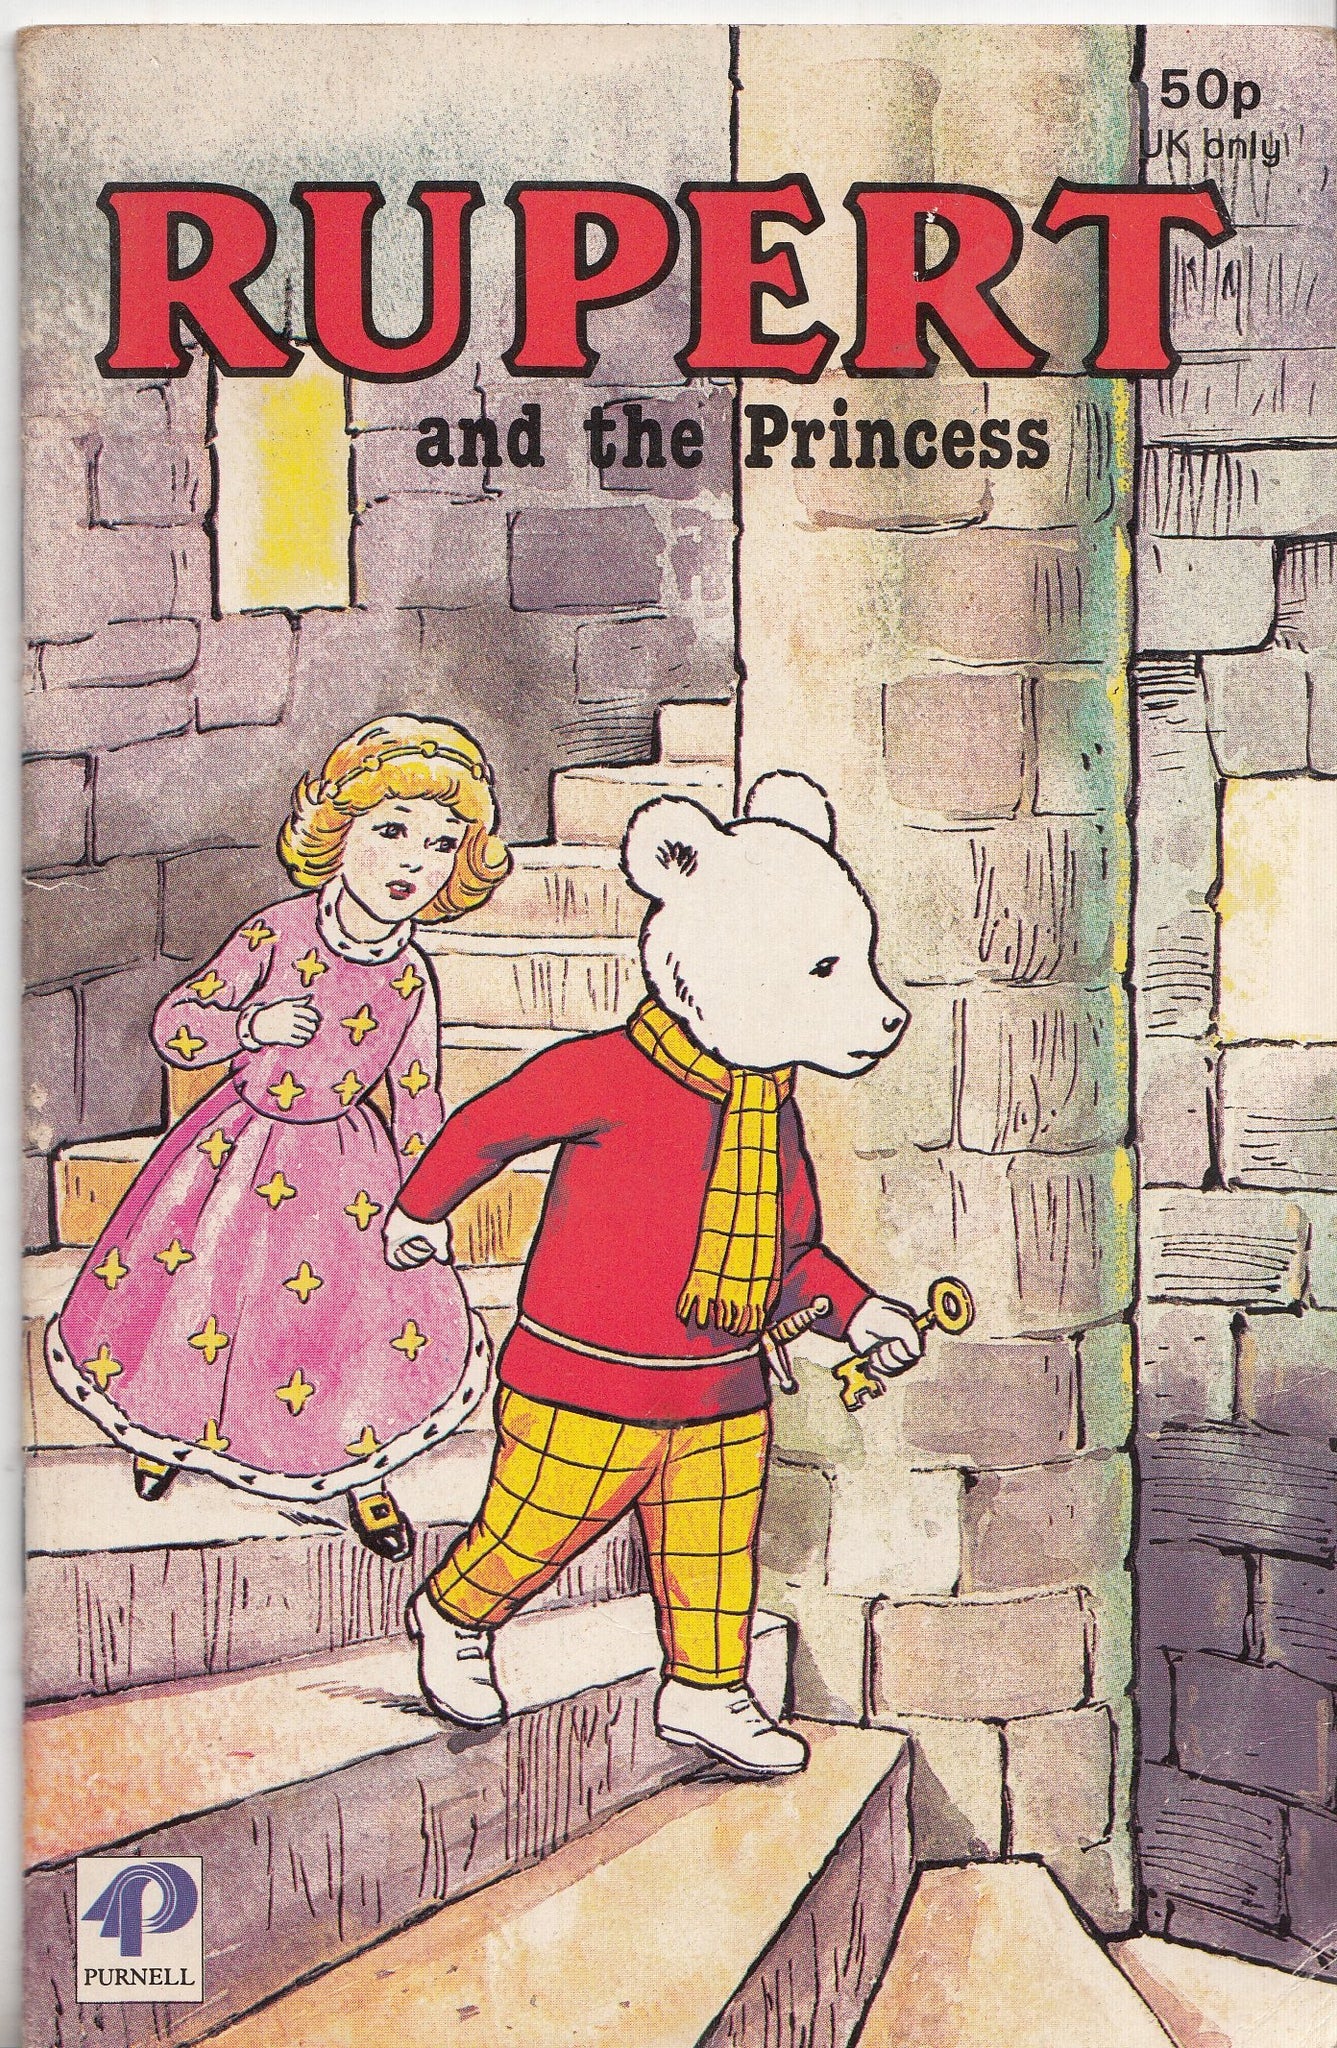 Rupert, the knight and the lady Paperback – 1 Jan 1985 - Used